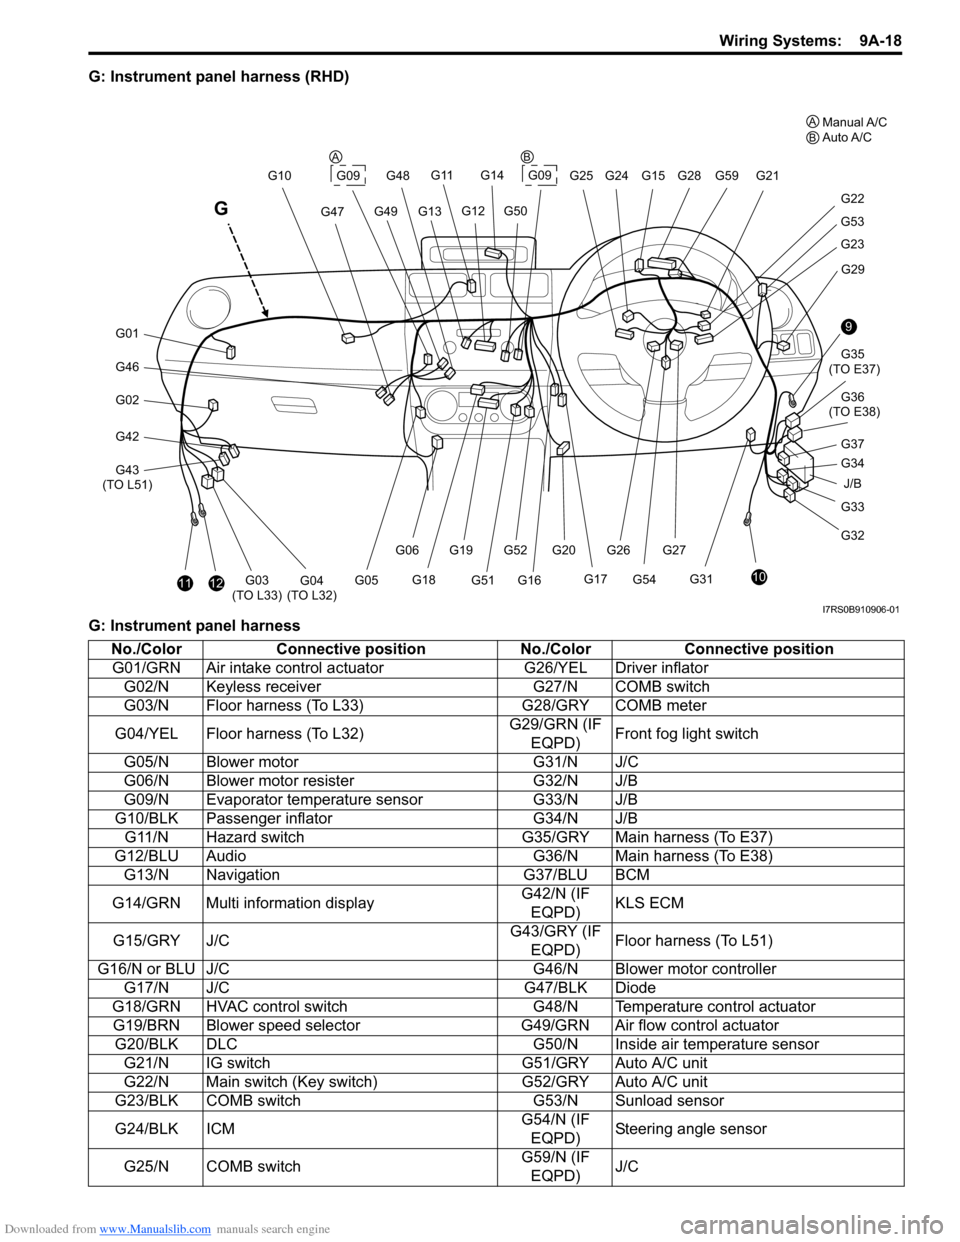 SUZUKI SWIFT 2008 2.G Service Workshop Manual Downloaded from www.Manualslib.com manuals search engine Wiring Systems:  9A-18
G: Instrument panel harness (RHD)
G: Instrument panel harness
J/B
9
10
G33
G32 G34 G35
 (TO E37)
G36
 (TO E38)
G31 G29
G